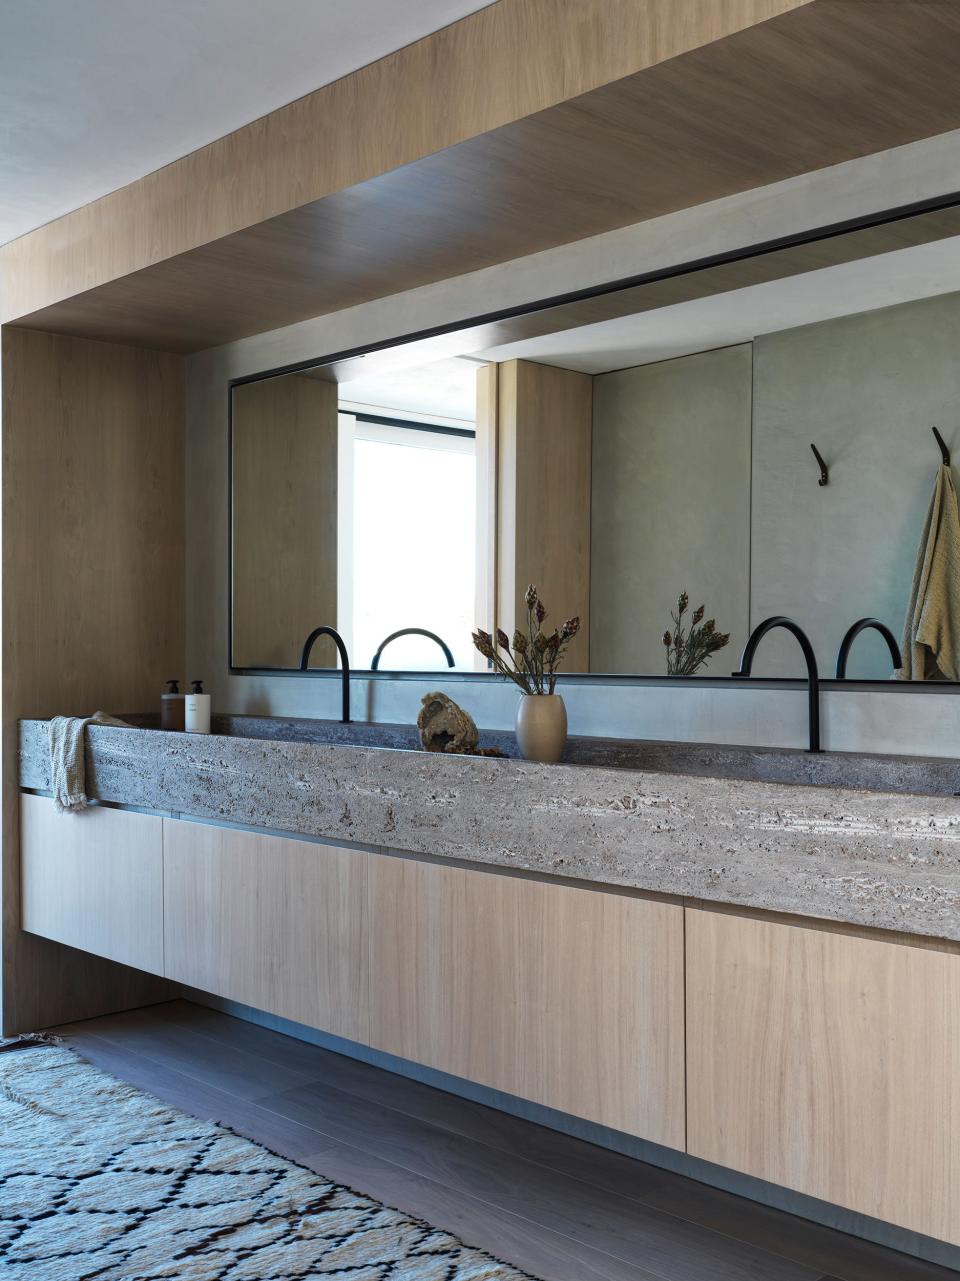 “The [primary] bathroom is really killer,” says Alexander of the well-lit space. The vanities are custom-designed by Alexander Design in bleached walnut with sandblasted titanium travertine, made by Vaselli and Cooritalia, with matte black plumbing by Vola and custom Cam Crawford mirror.